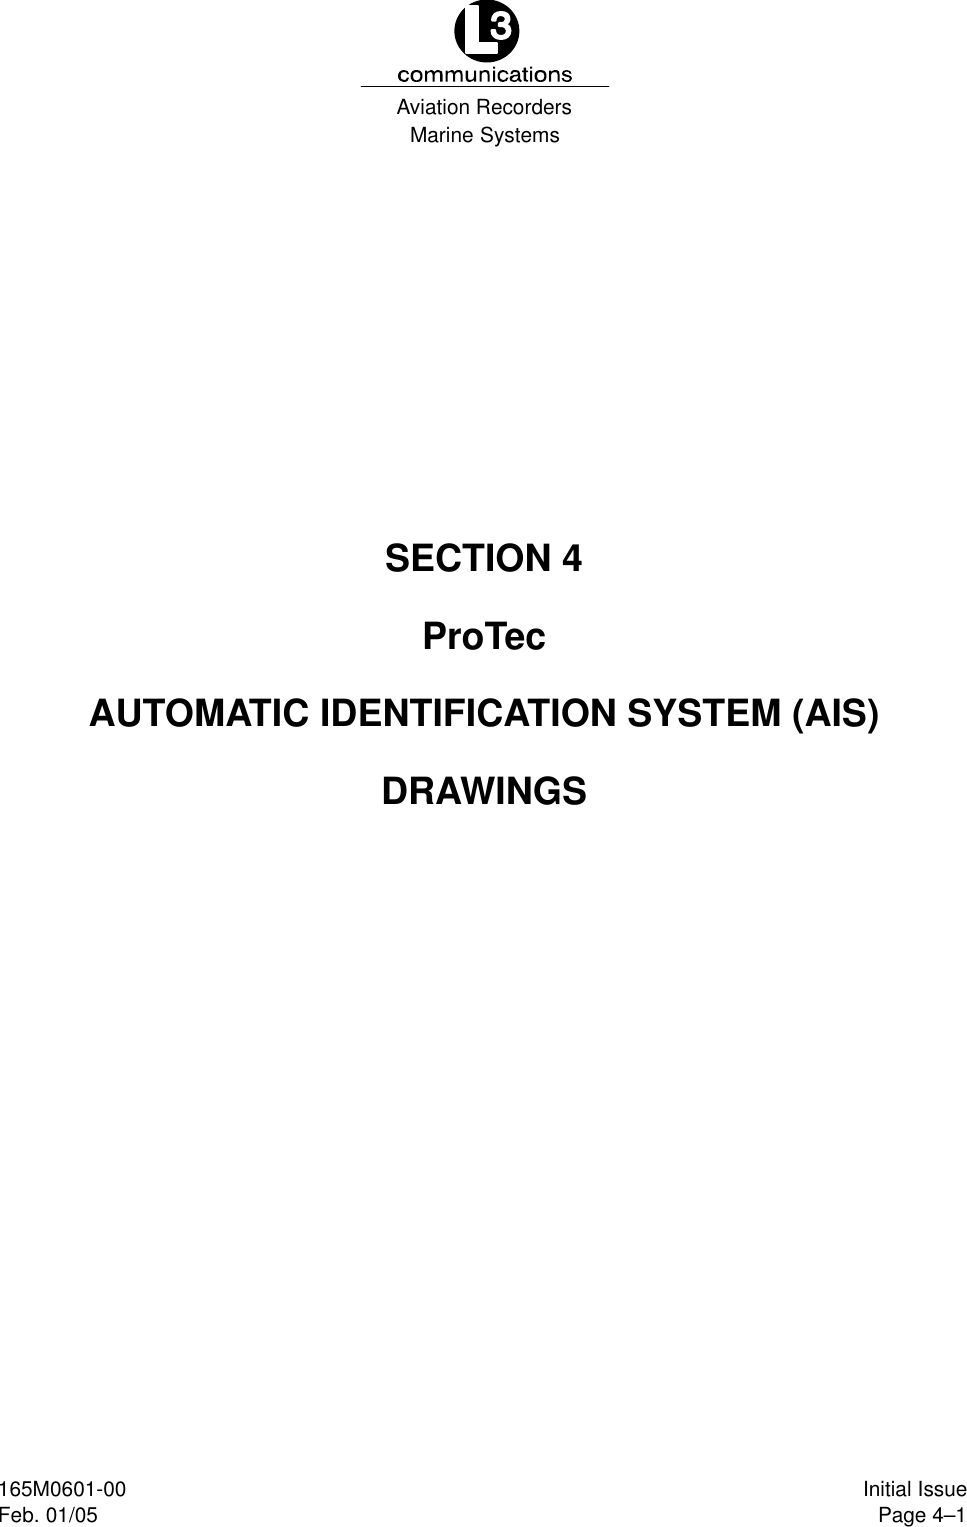 Marine SystemsAviation RecordersPage 4–1Initial Issue165M0601-00Feb. 01/05SECTION 4ProTecAUTOMATIC IDENTIFICATION SYSTEM (AIS)DRAWINGS